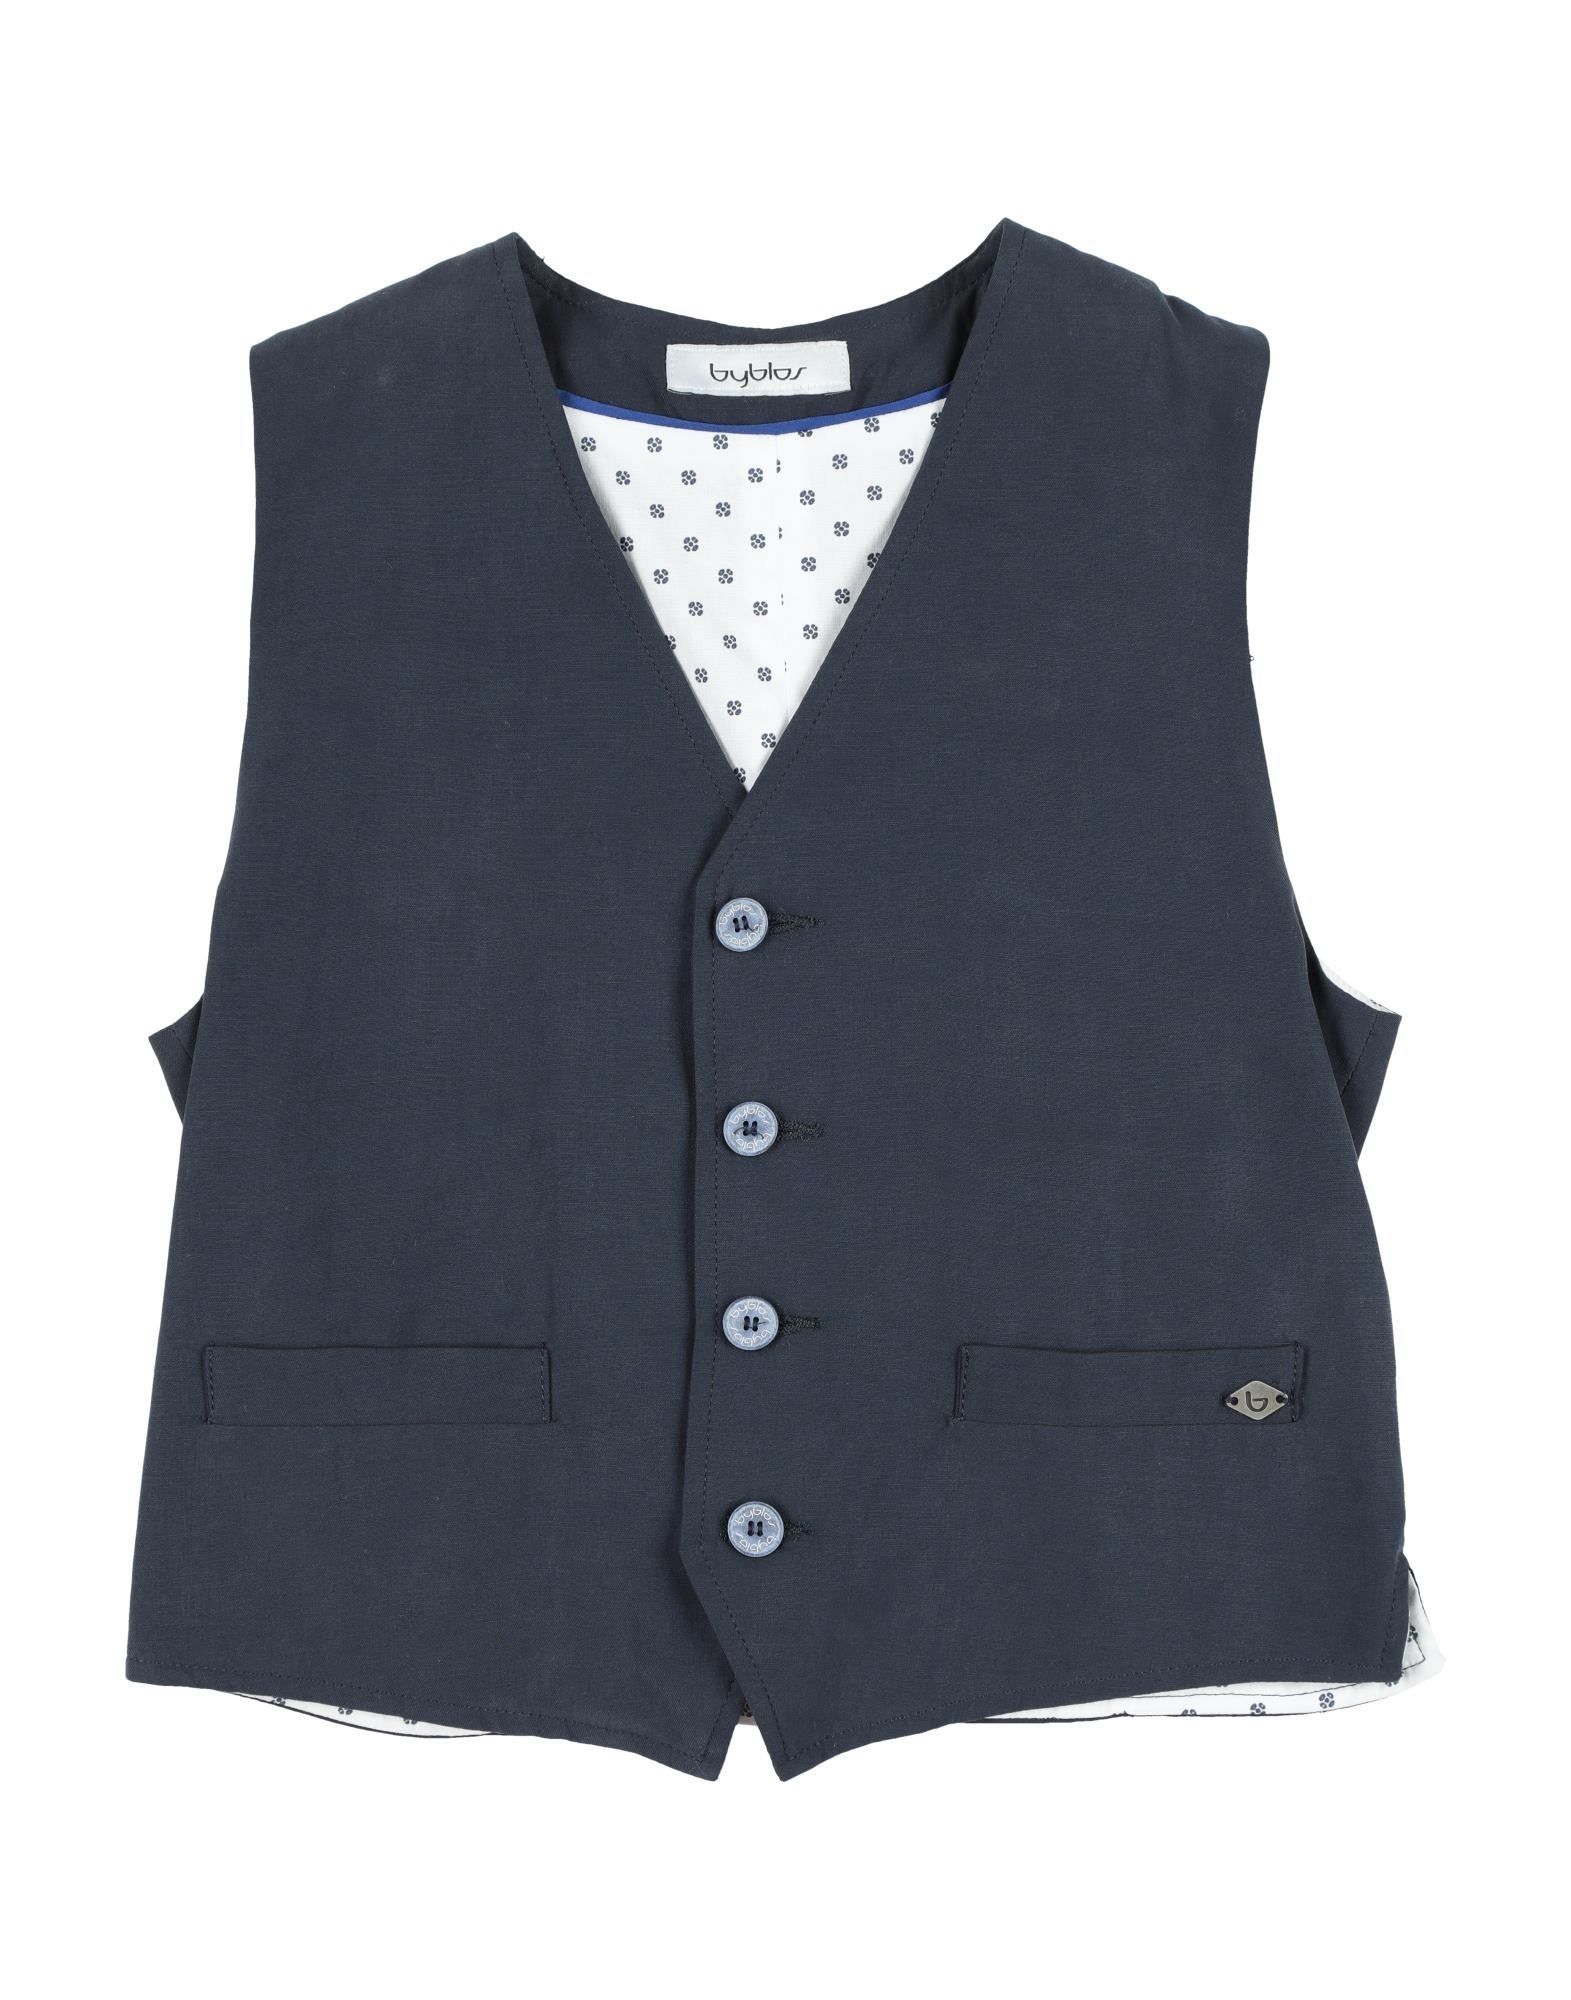 plain weave, logo, contrasting applications, solid colour, multipockets, 4 buttons, v-neck, single-breasted , sleeveless, fully lined, back split, wash at 30° c, dry cleanable, iron at 110° c max, do not bleach, do not tumble dry